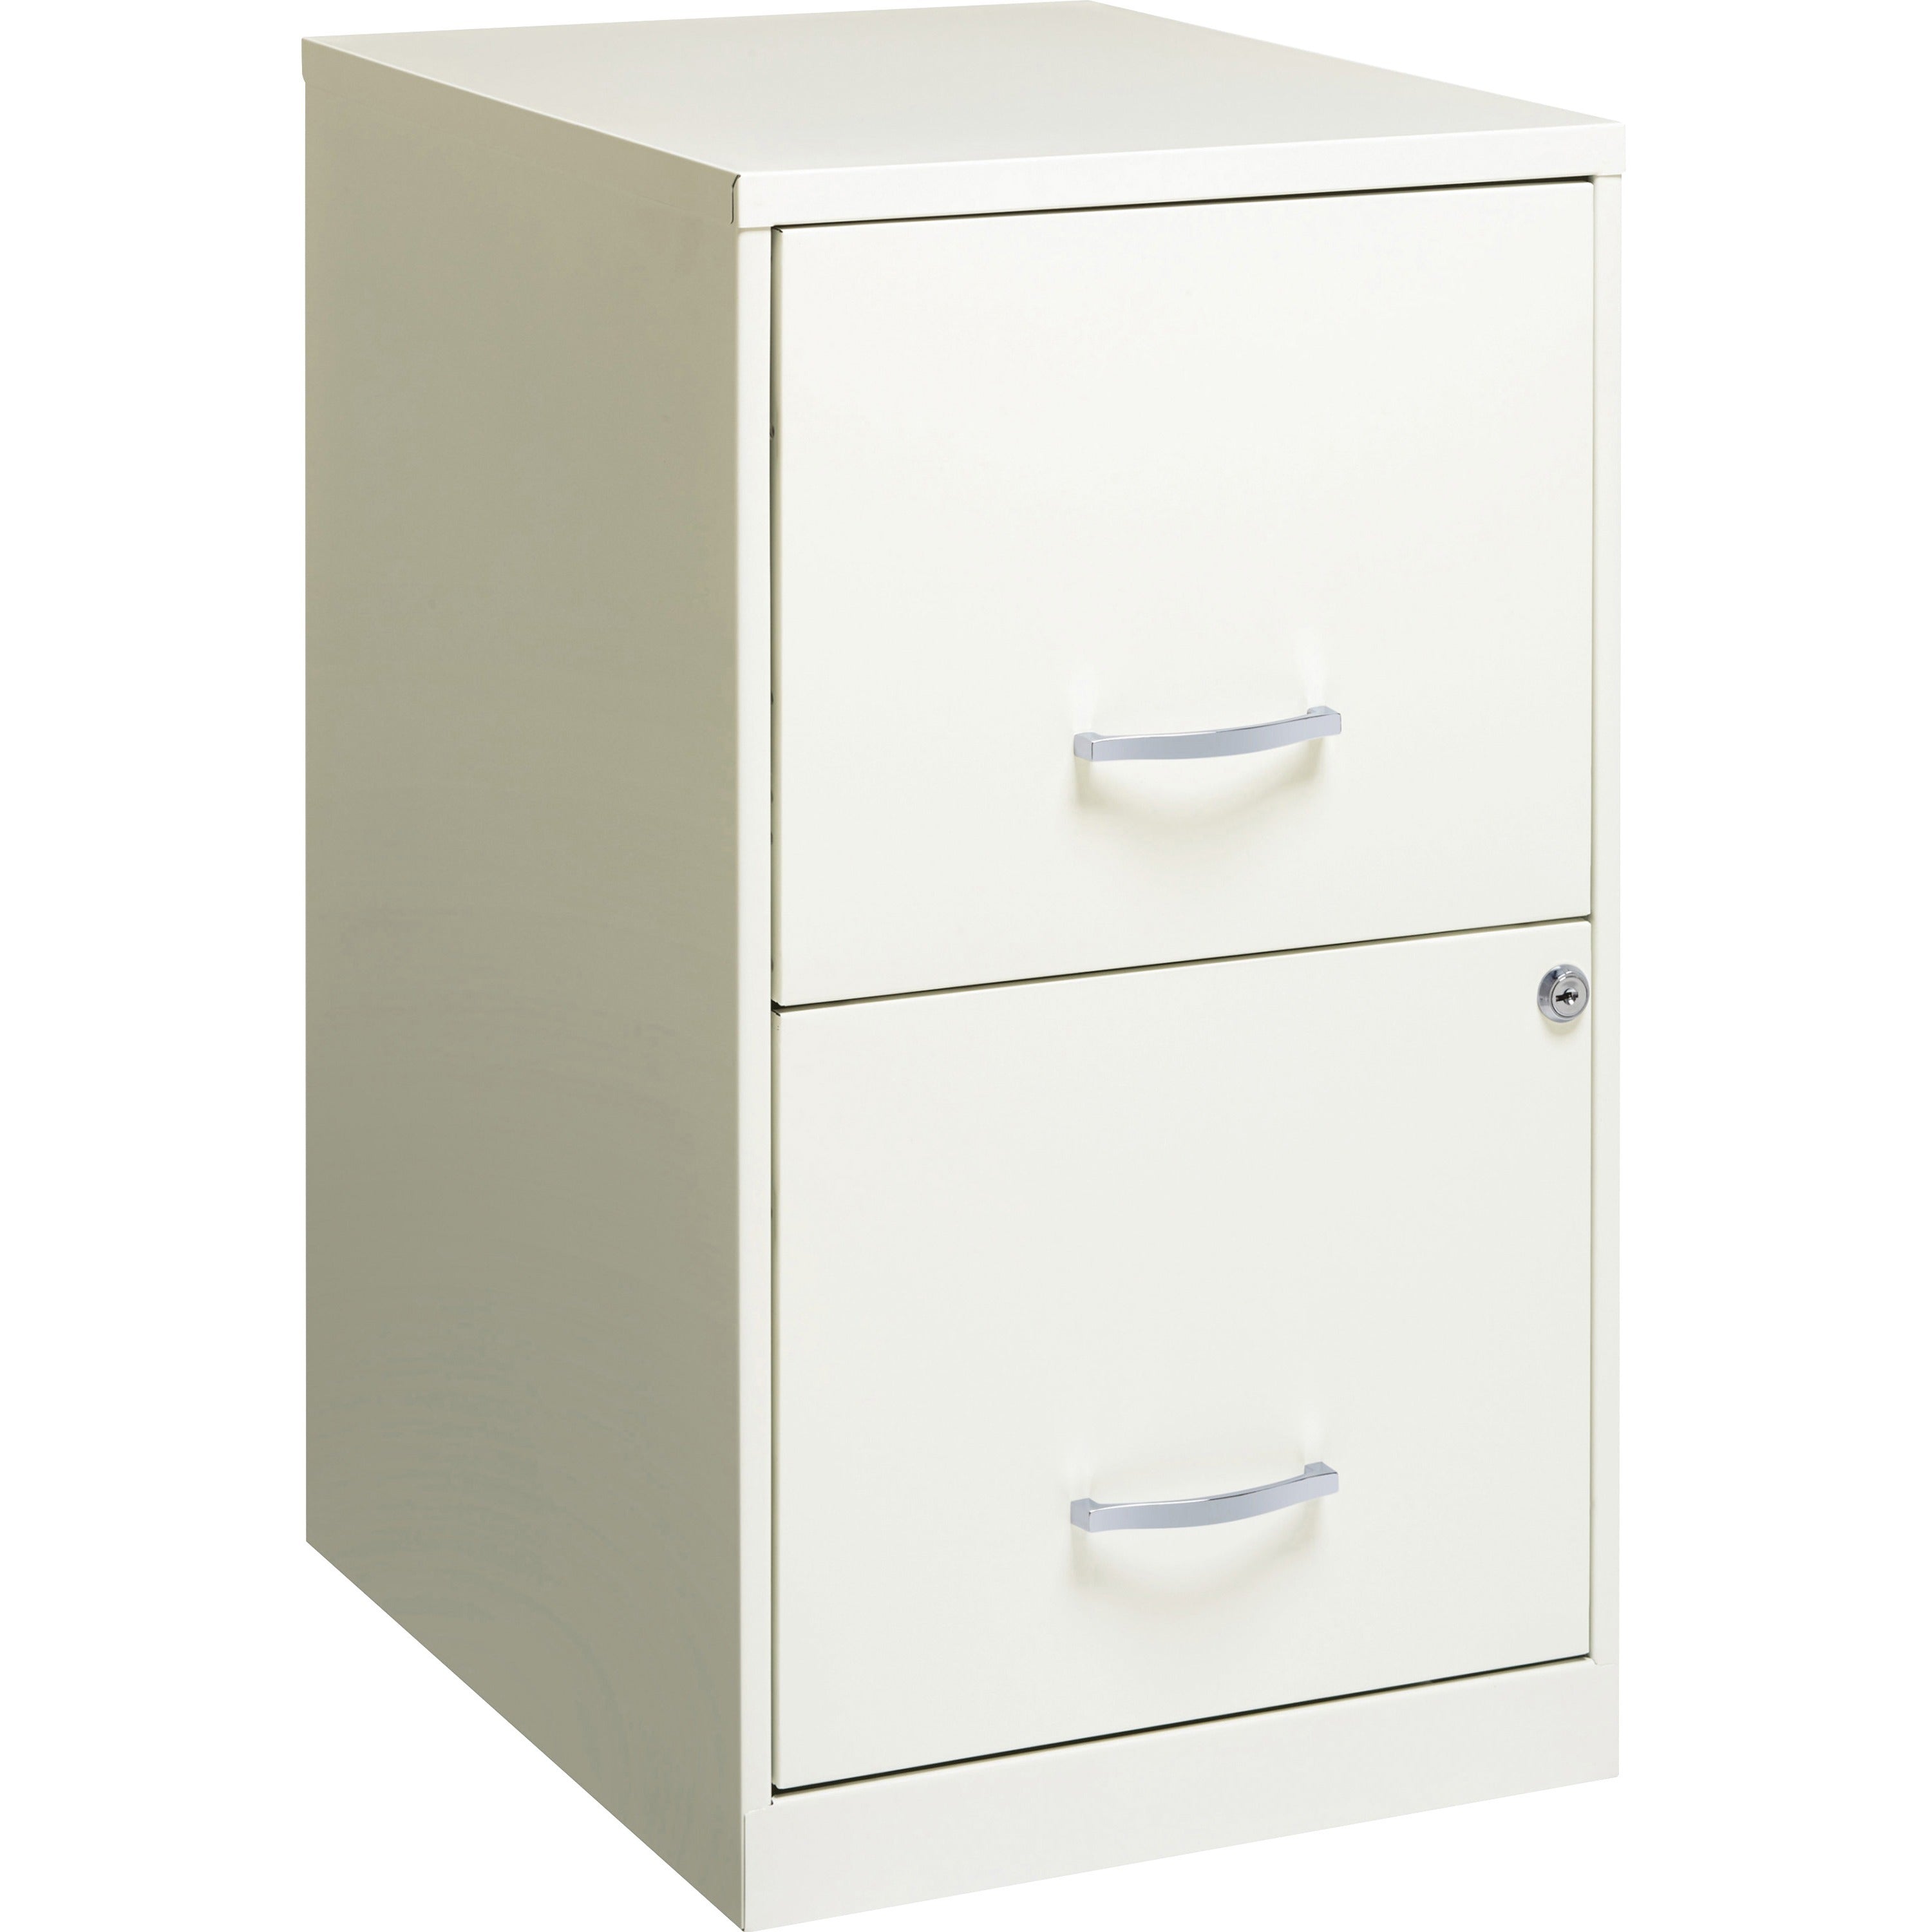 nusparc-file-cabinet-142-x-18-x-245-2-x-drawers-for-file-letter-vertical-locking-drawer-glide-suspension-nonporous-surface-white-baked-enamel-steel-recycled_nprvf218aawe - 1